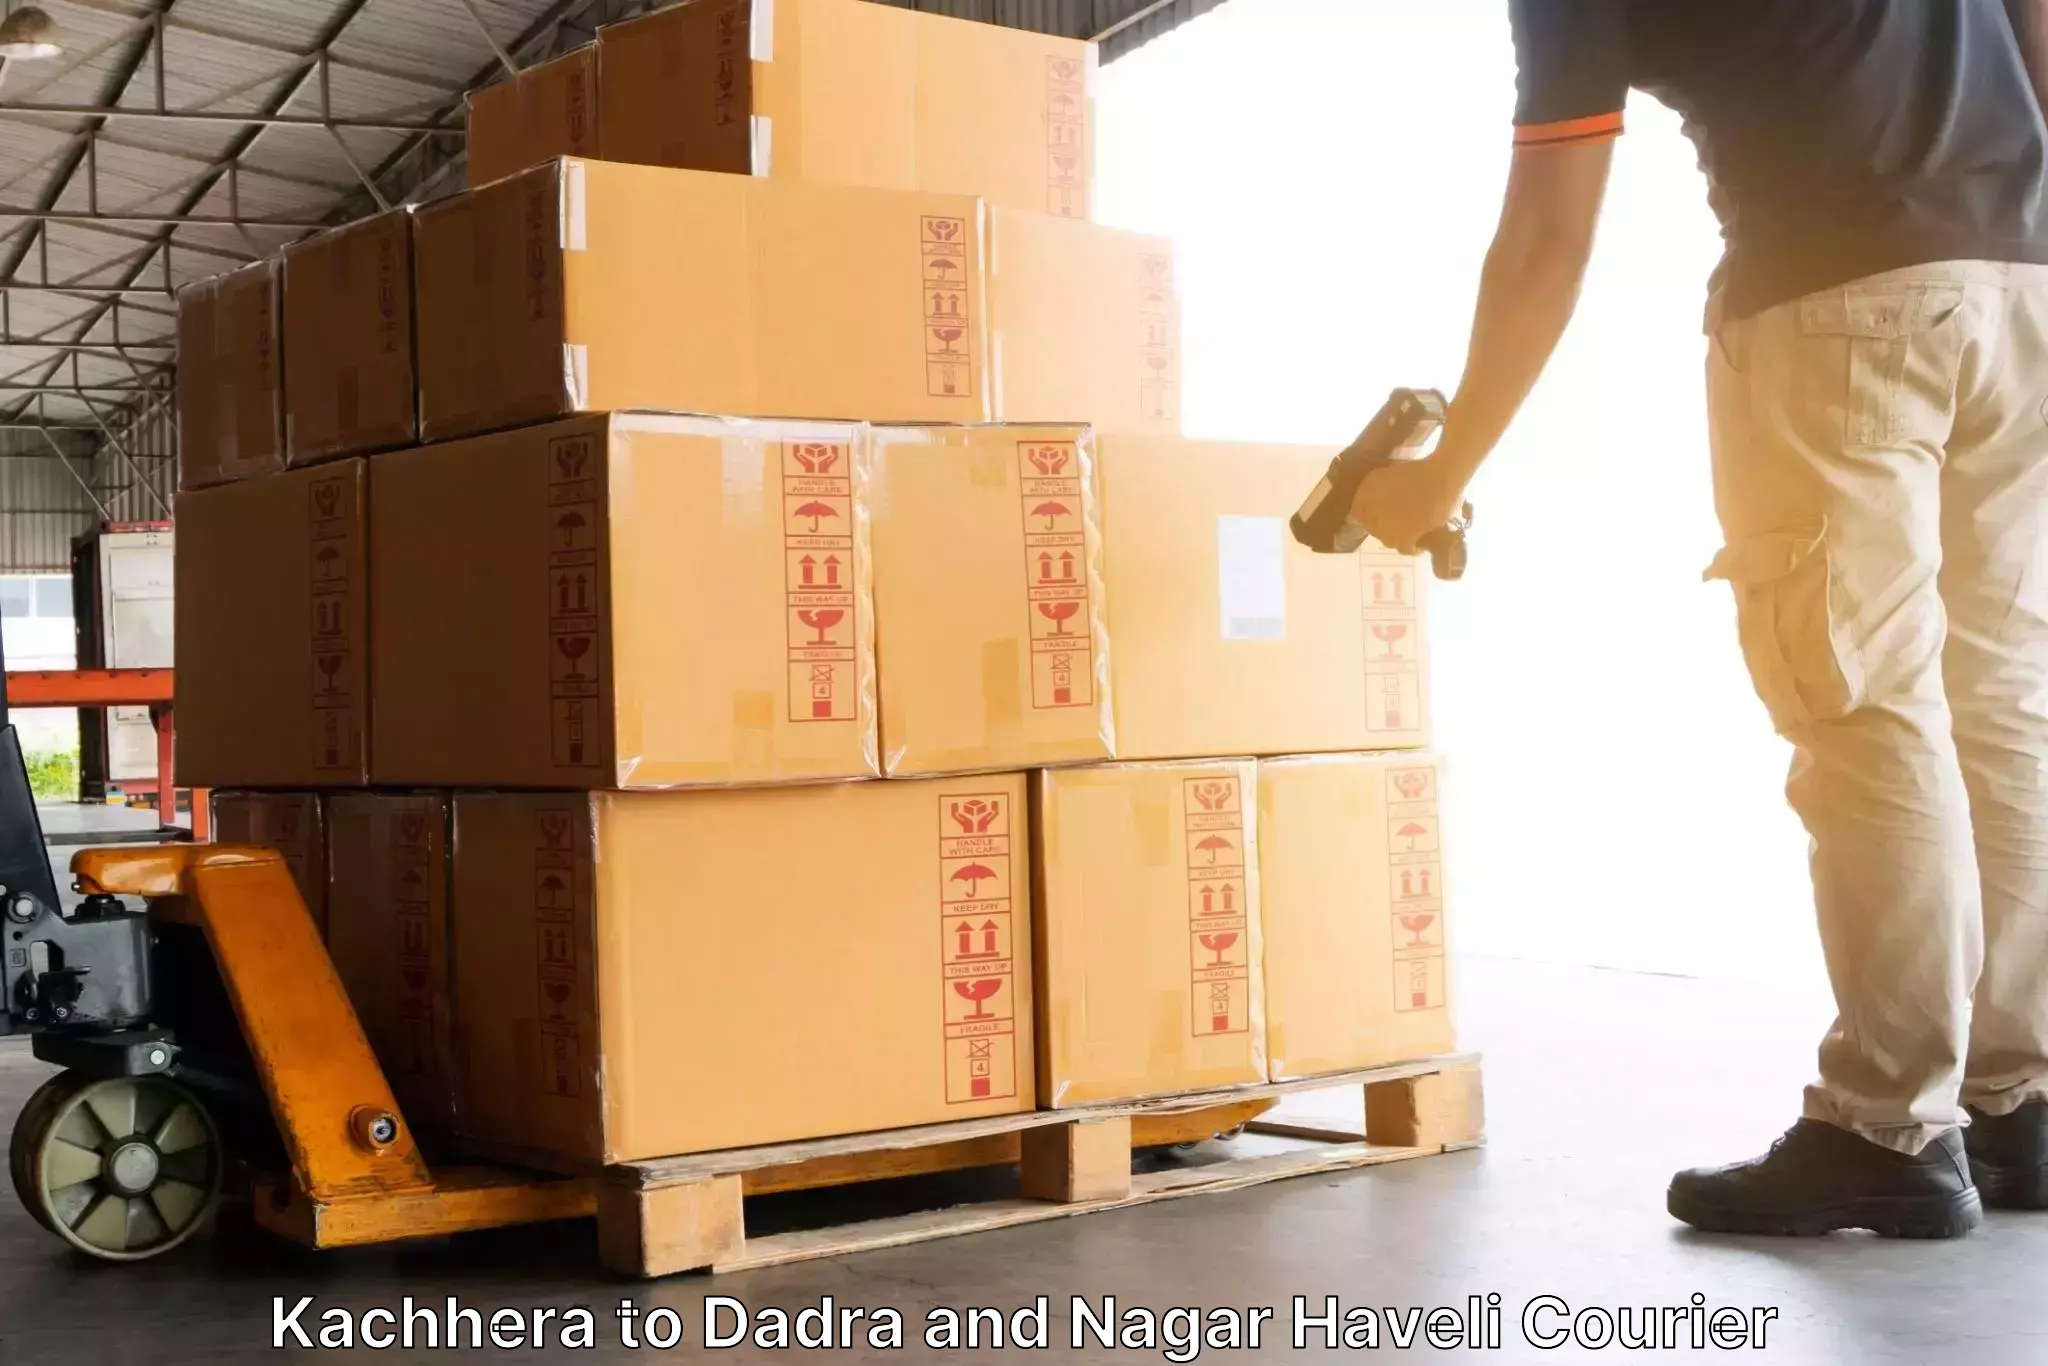 Next-day delivery options in Kachhera to Dadra and Nagar Haveli